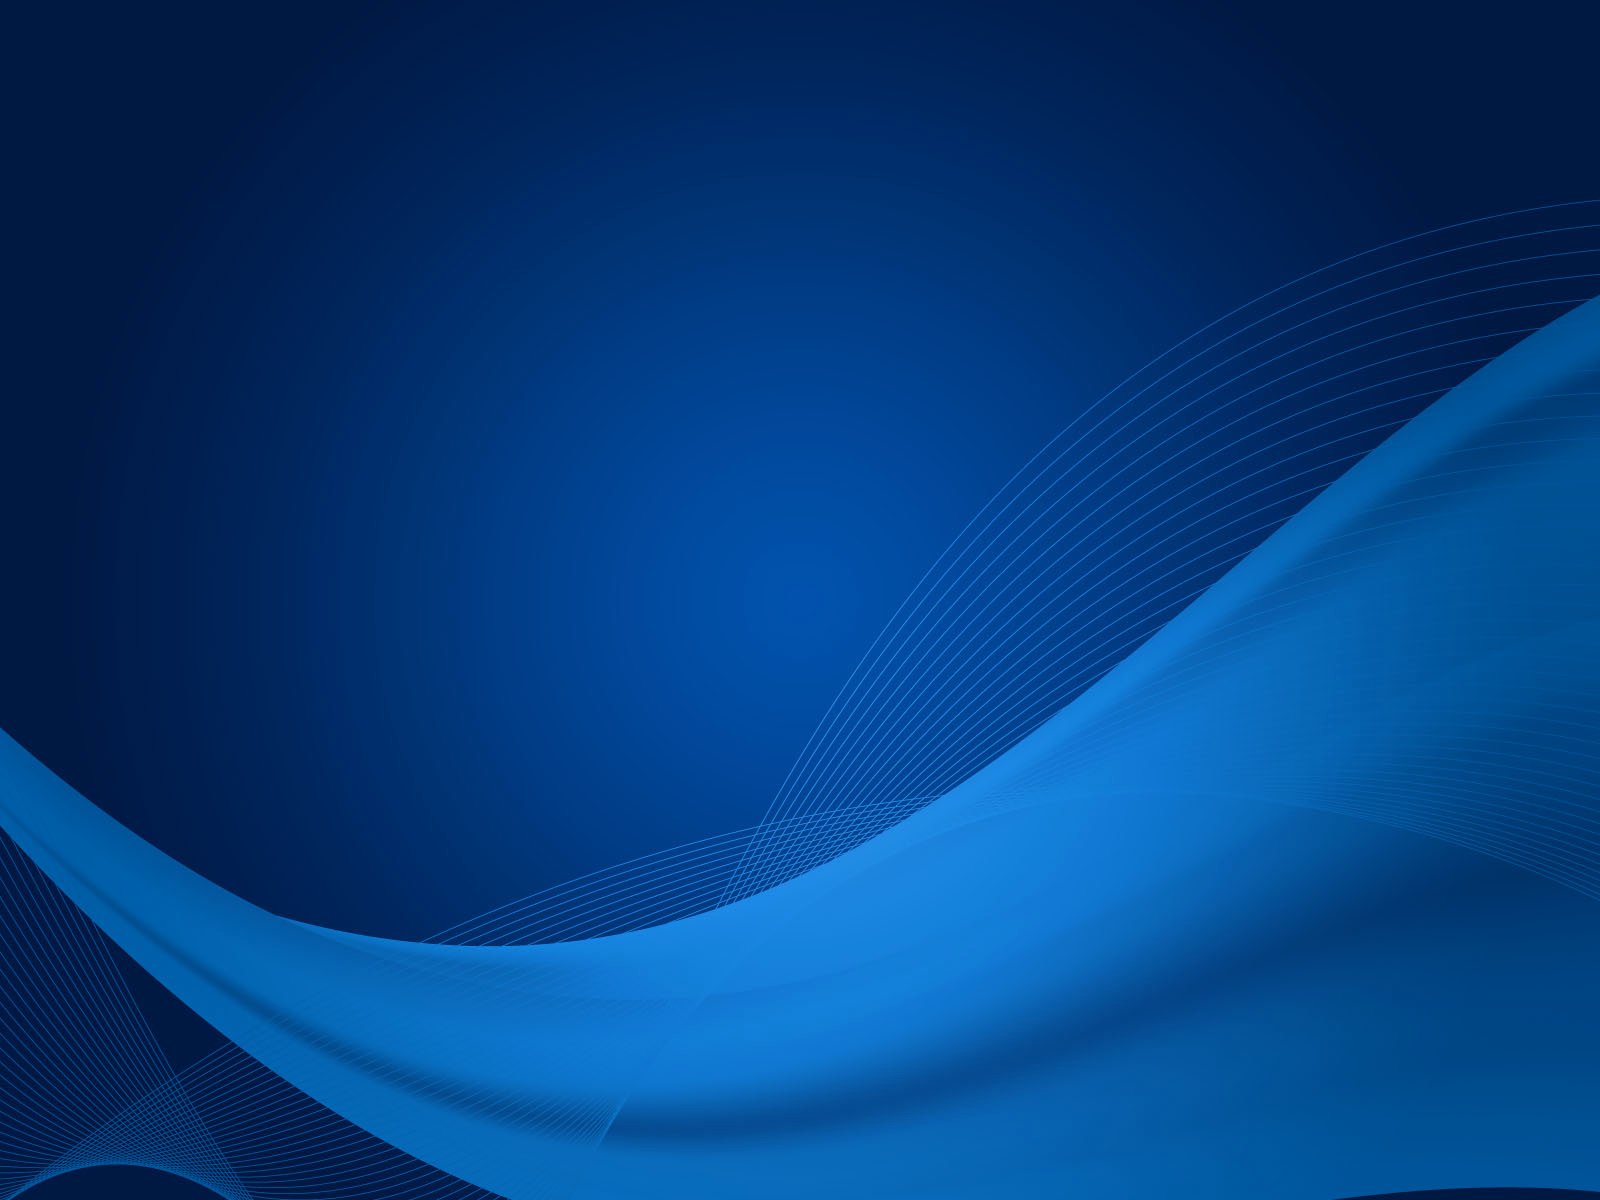 Free 3d Blue Wave Lines Backgrounds for Powerpoint 3d Ppt